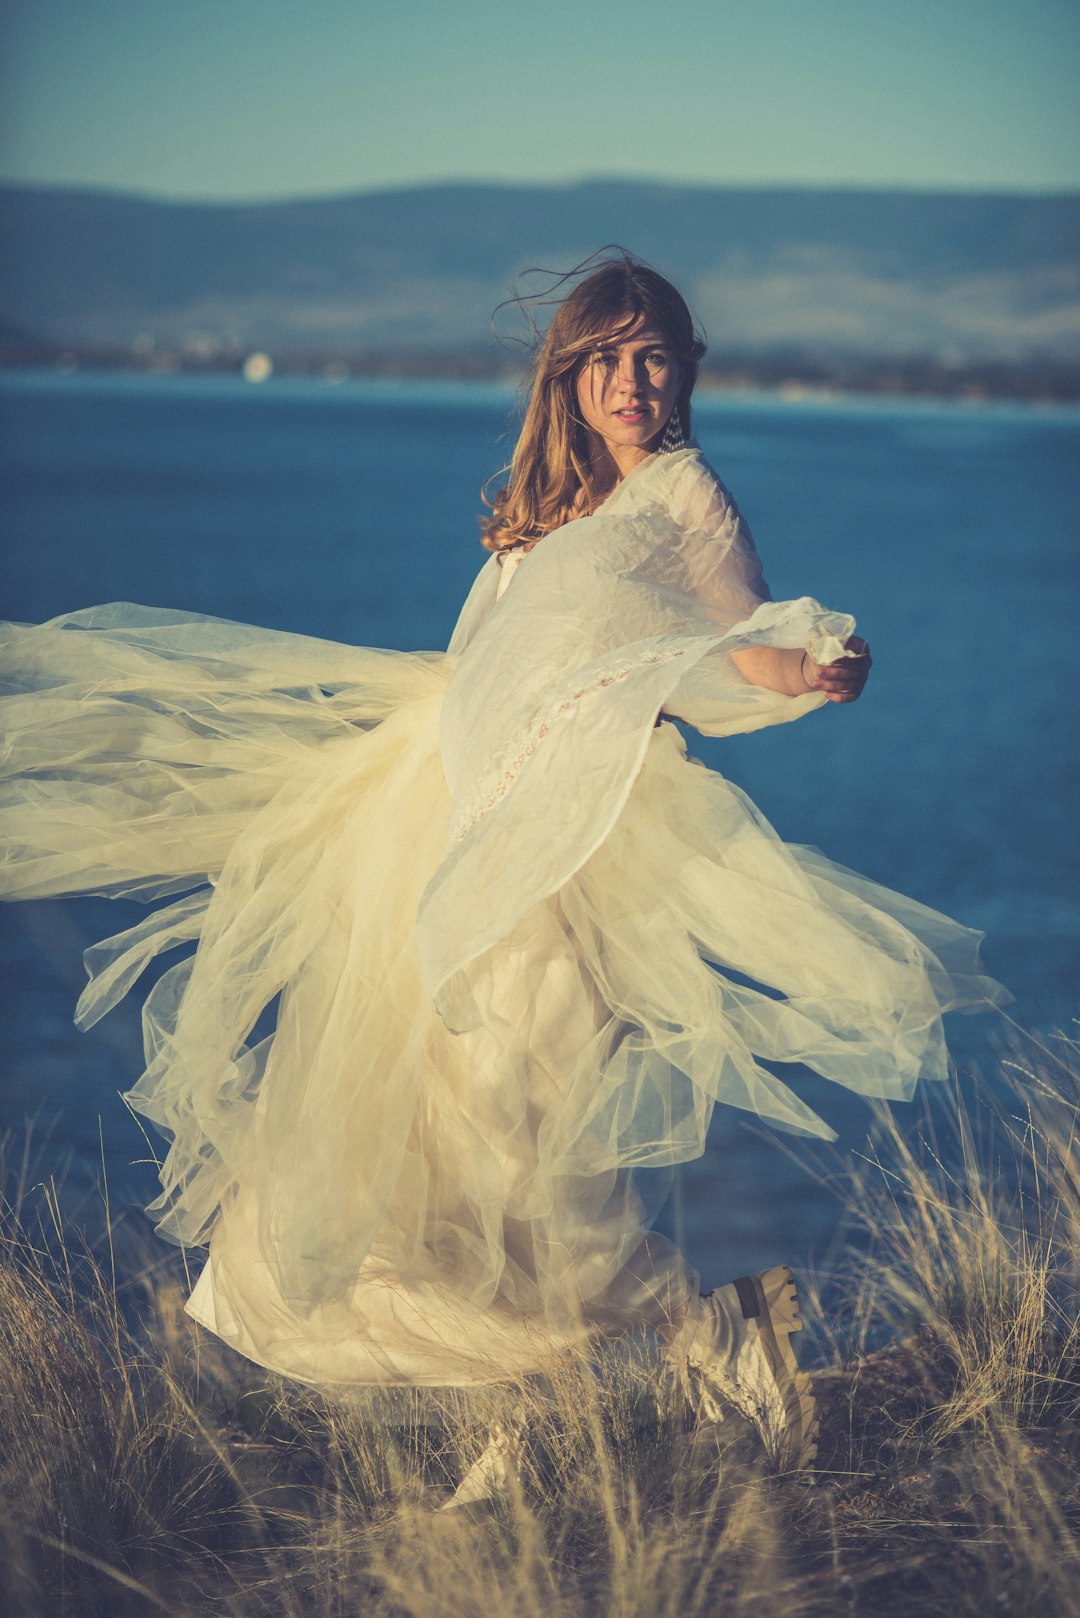 woman in white dress standing on brown grass field near body of water during daytime